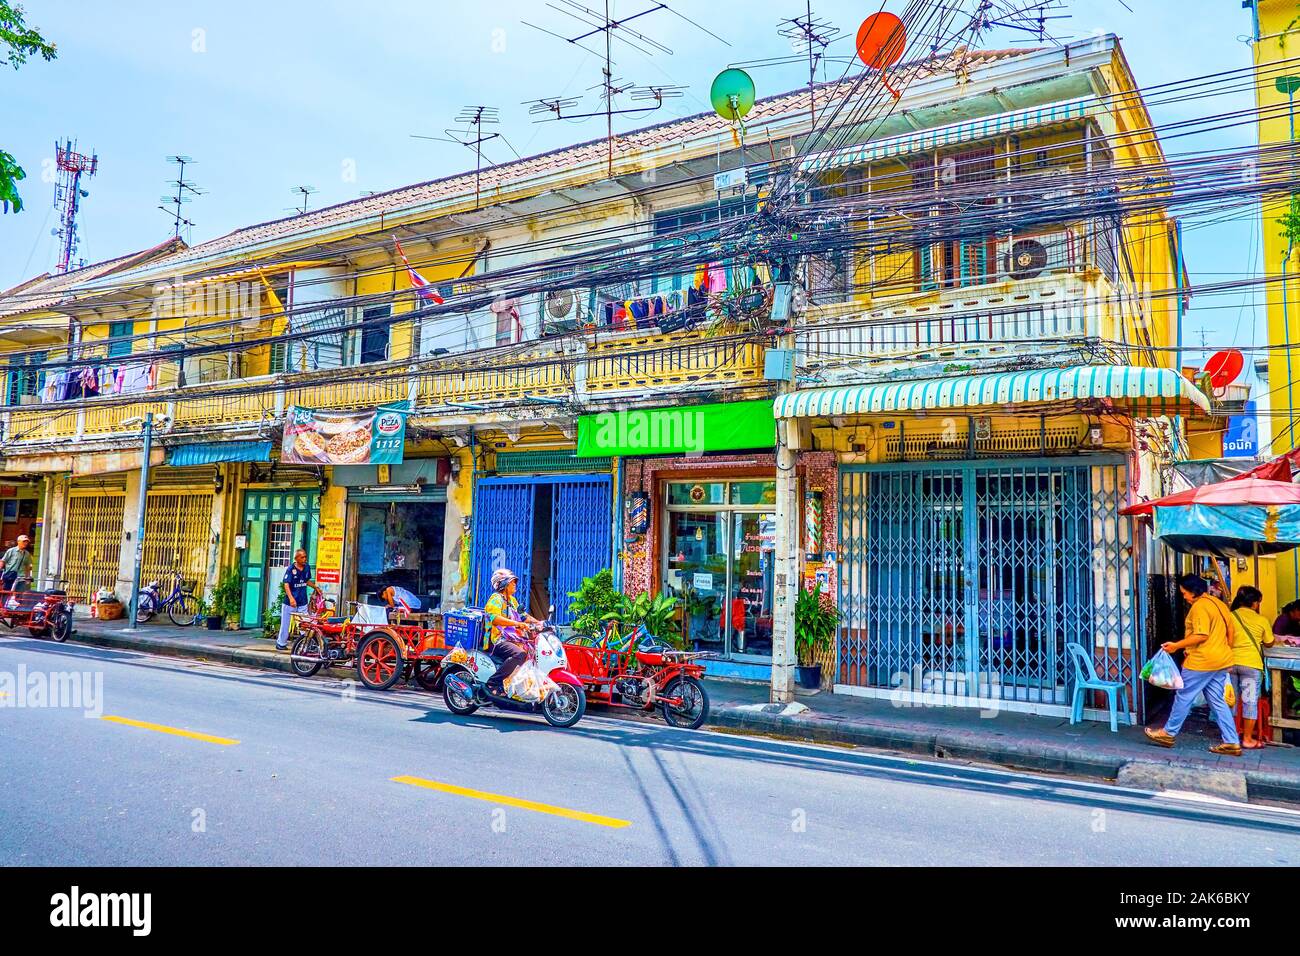 BANGKOK, THAILAND - APRIL 15, 2019: The small shabby residential building along Thanon Tanao street with cafes and shops, on April 15 in Bangkok Stock Photo